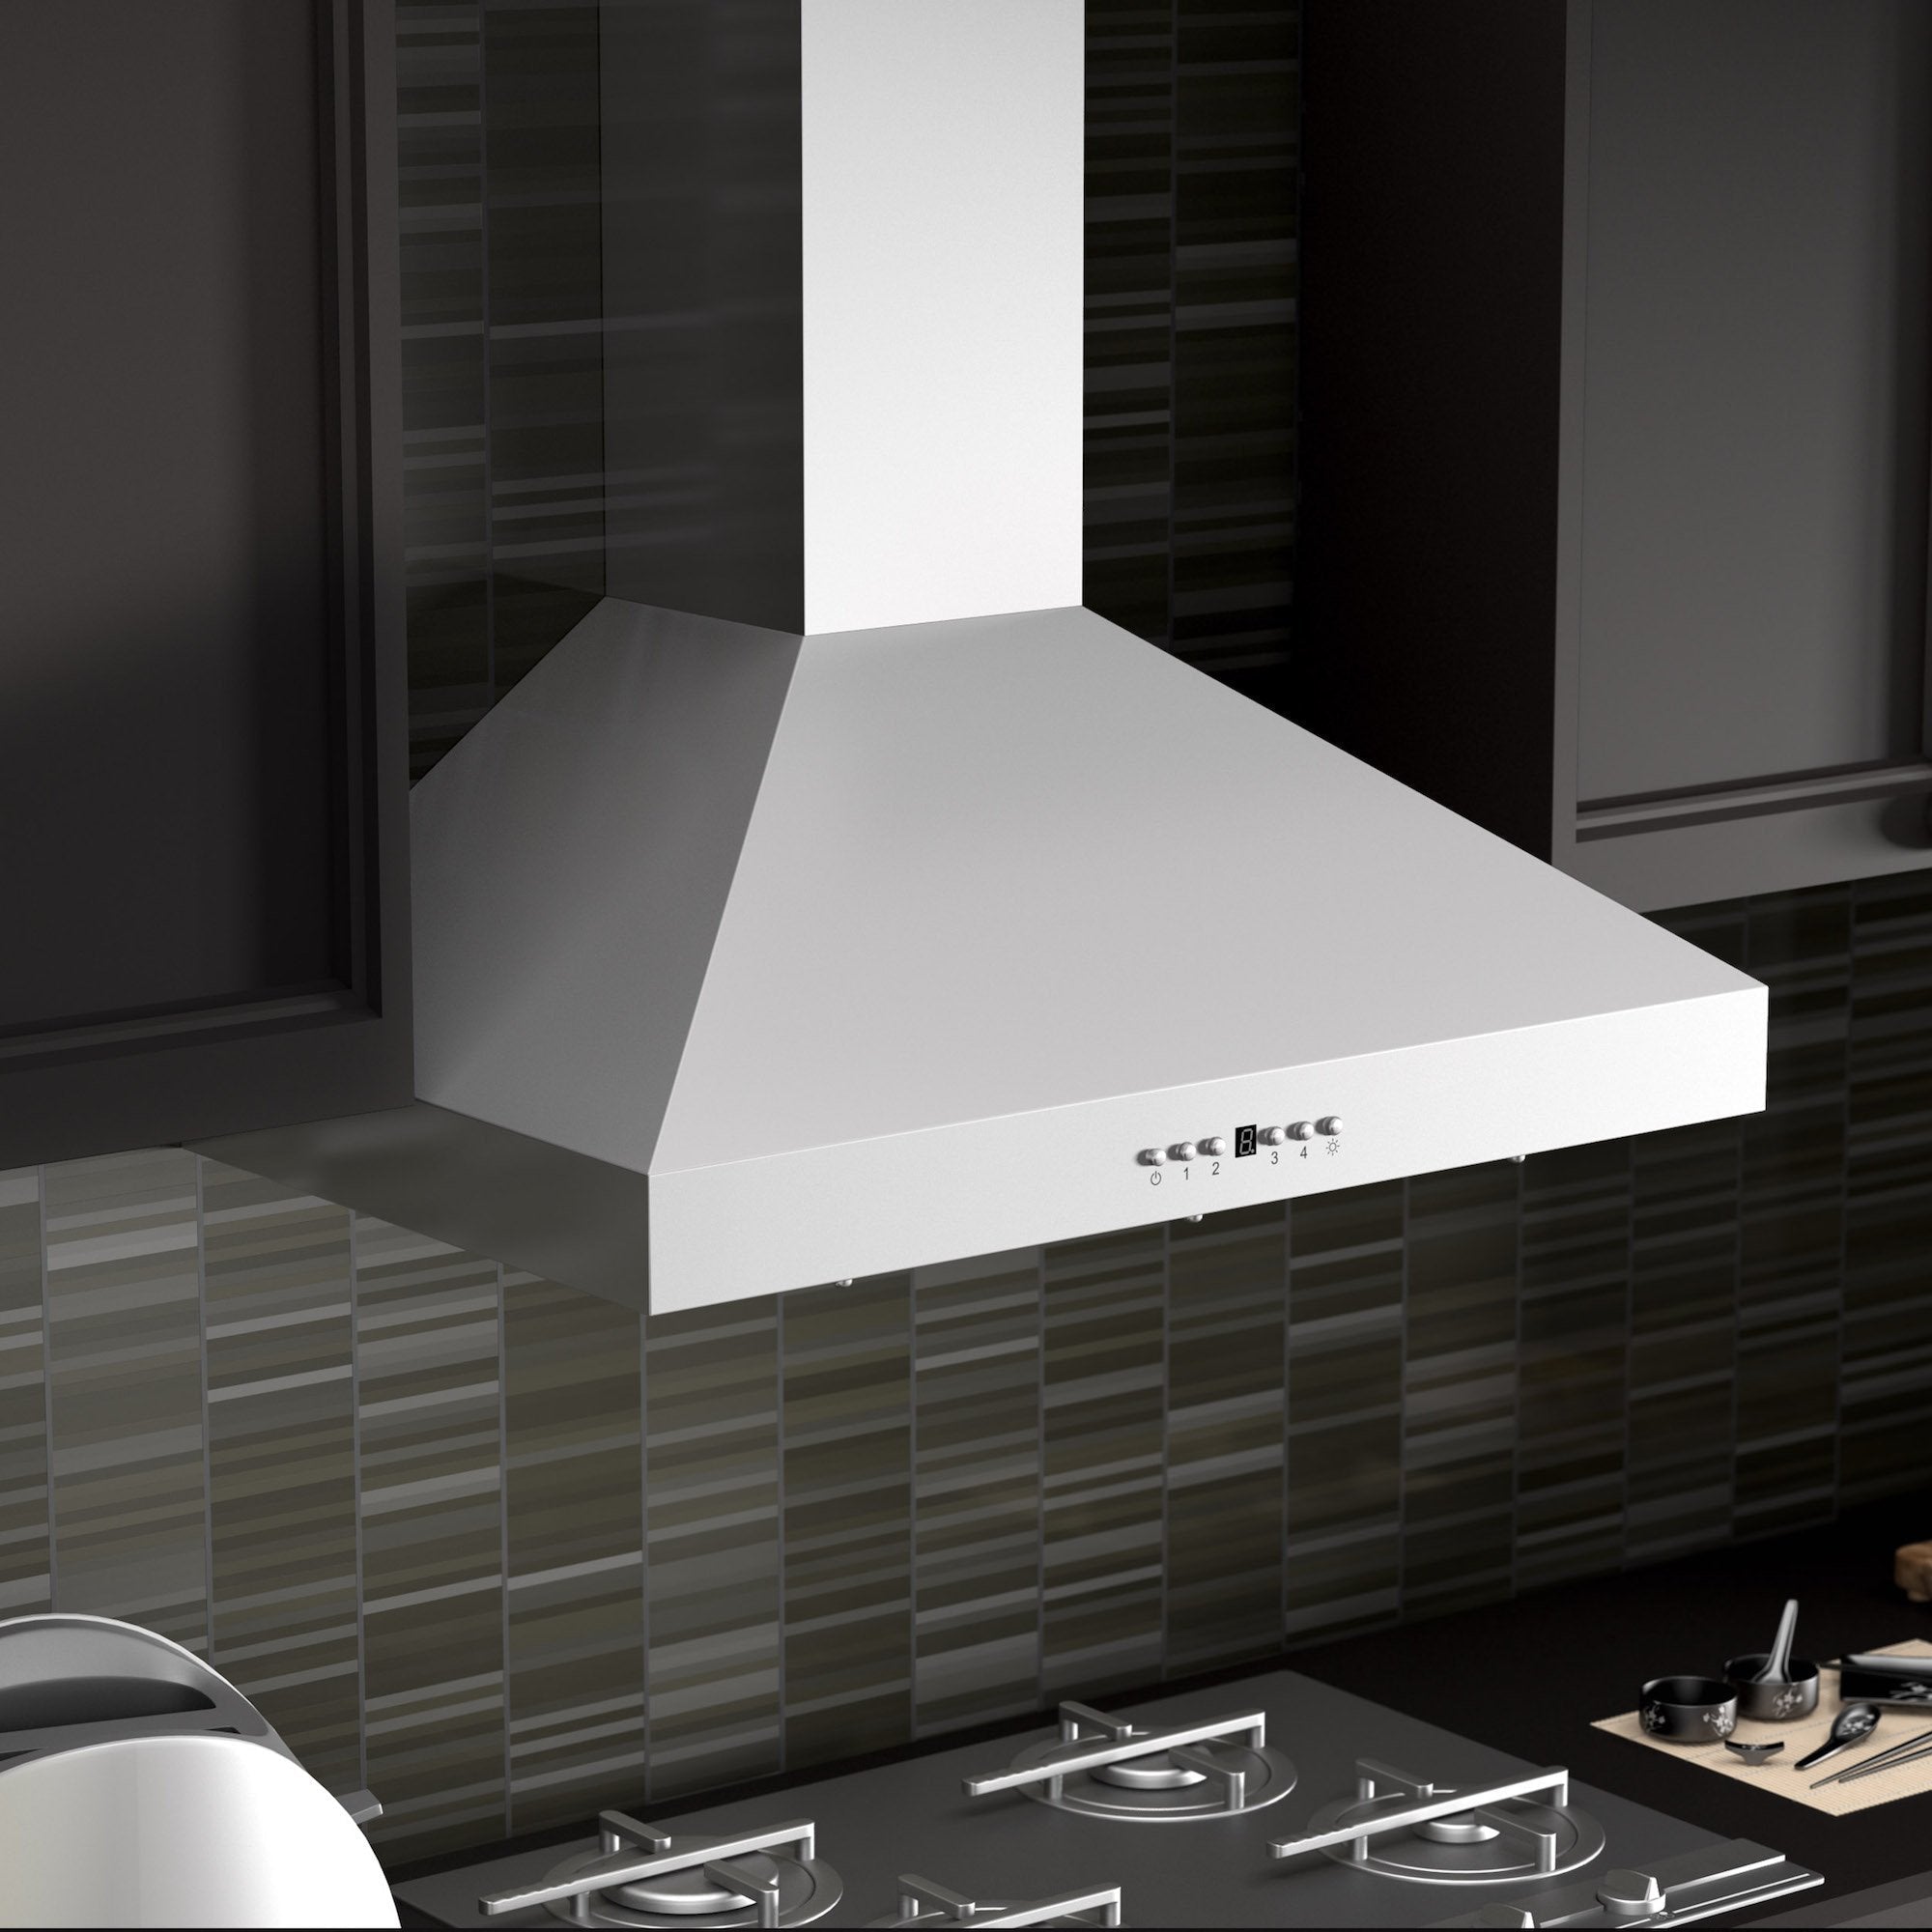 ZLINE Convertible Vent Wall Mount Range Hood in Stainless Steel (KL3) rendering in a rustic kitchen from above.